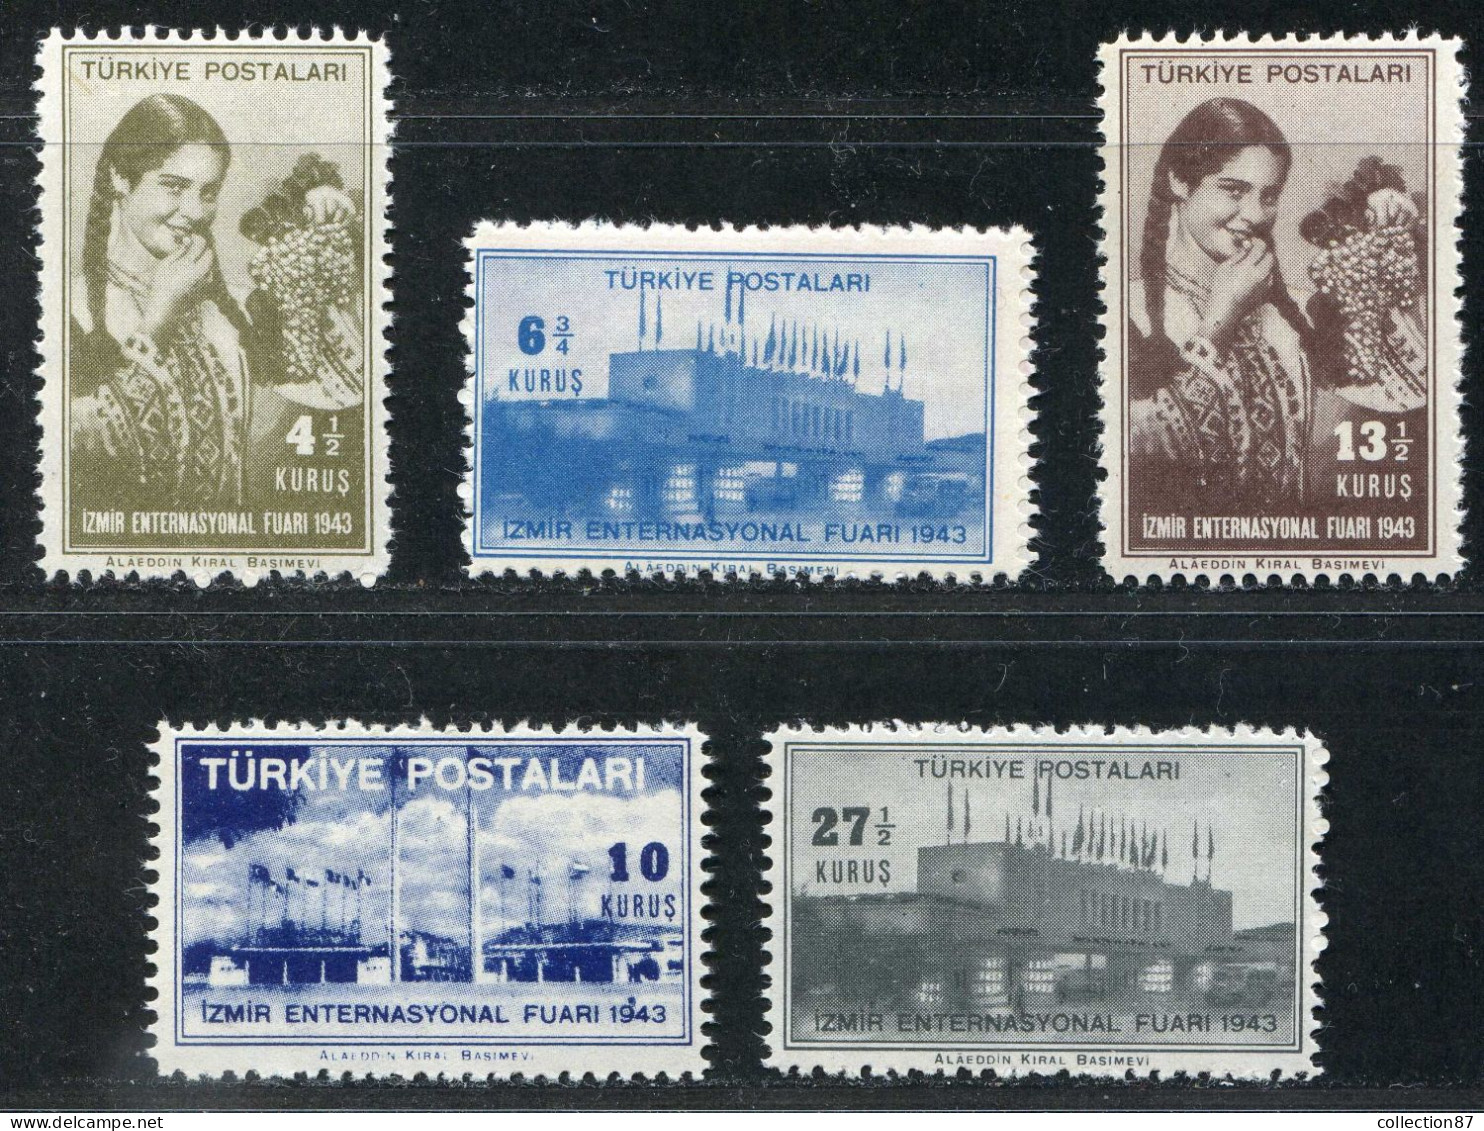 REF 091 > TURQUIE < Yv N° 1014 à 1019 * * < Neuf Luxe Dos Visible MNH * * > Foire Izmir - Nuevos